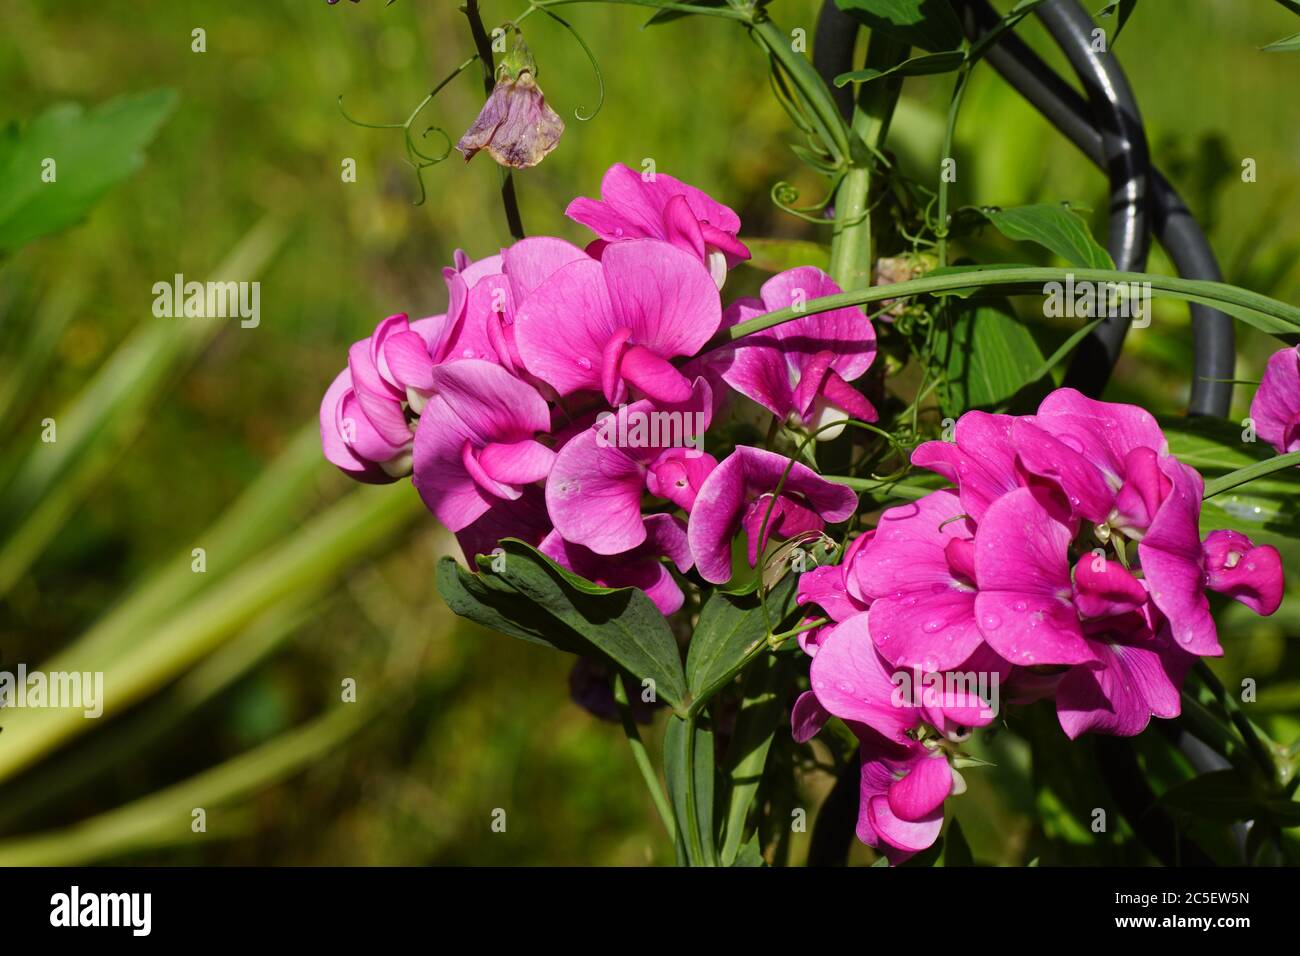 Pink flowers of everlasting pea (Lathyrus latifolius) of the pea family Fabaceae. Early summer in a Dutch garden. Stock Photo